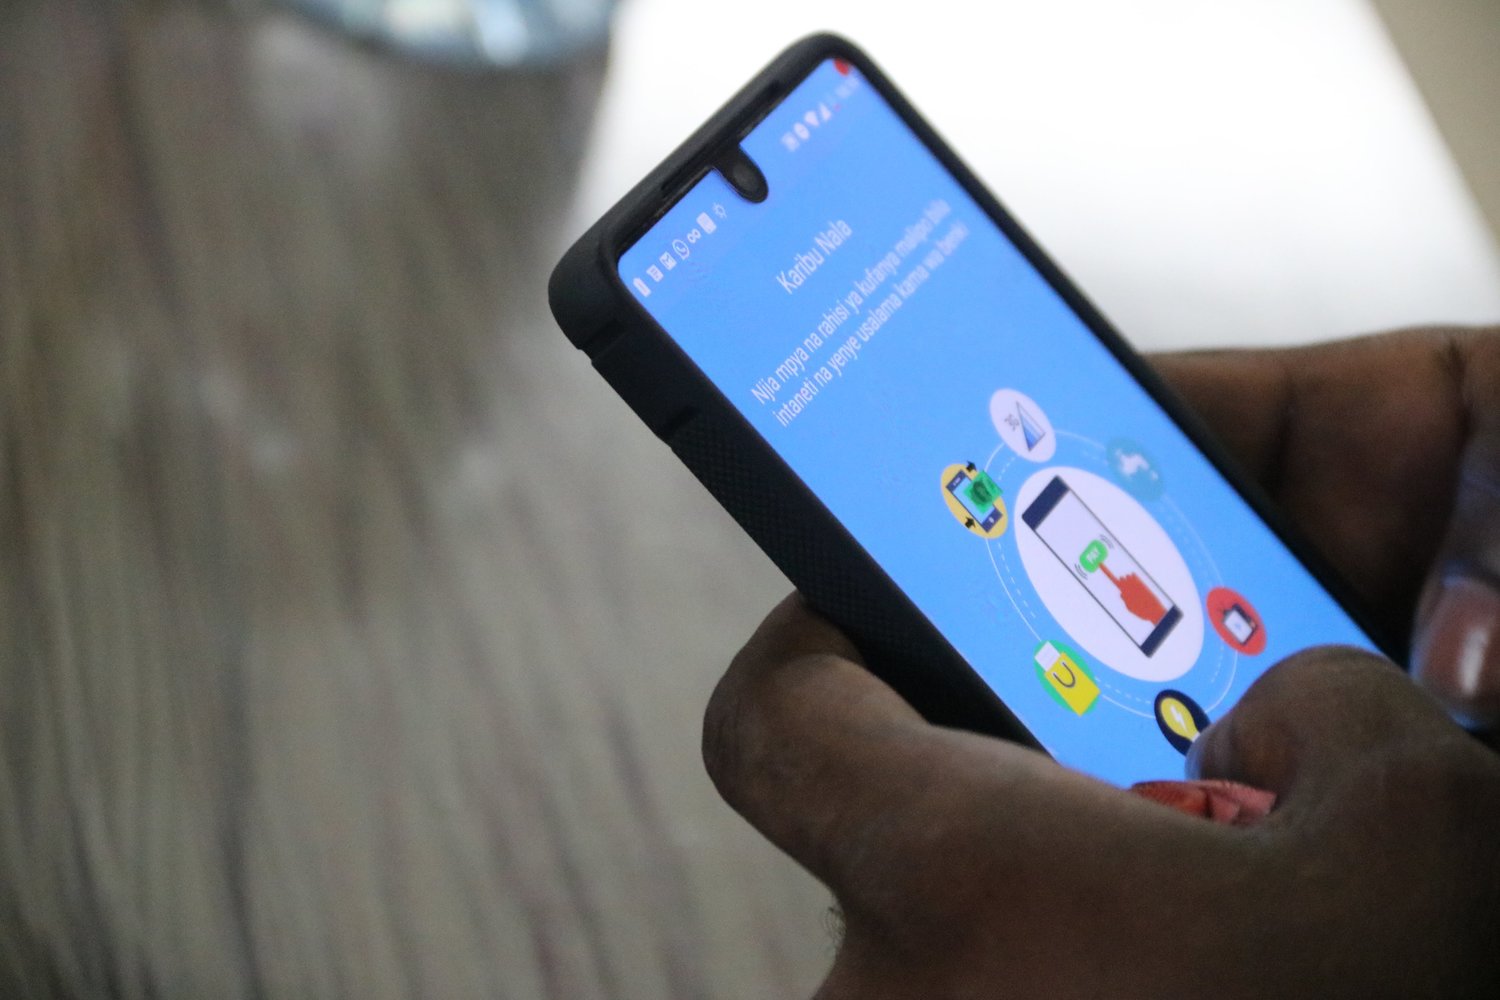 Tanzania's Fintech startup; NALA, emerged finalists in the 2018 Ecobank Fintech Challenge. Pictured is a user using the Nala solution app. (Photo Credit: Nala)